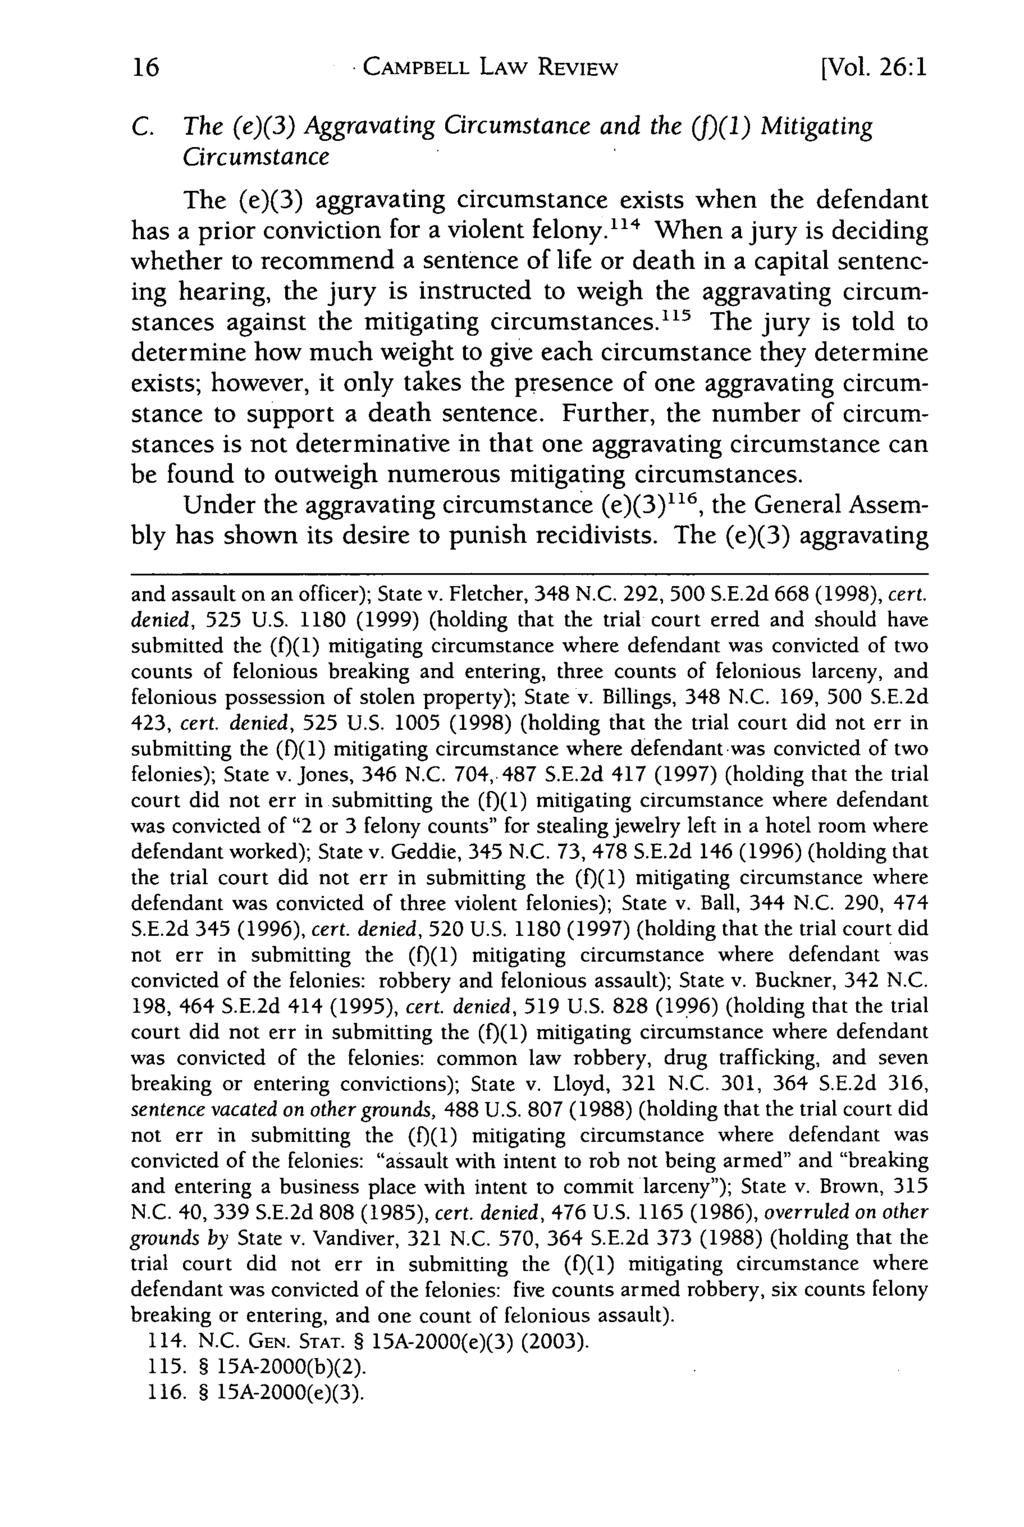 Campbell. CAMPBELL Law Review, LAW Vol. 26, Iss. 1 [2004], Art. 1 REVIEW [Vol. 26:1 C.